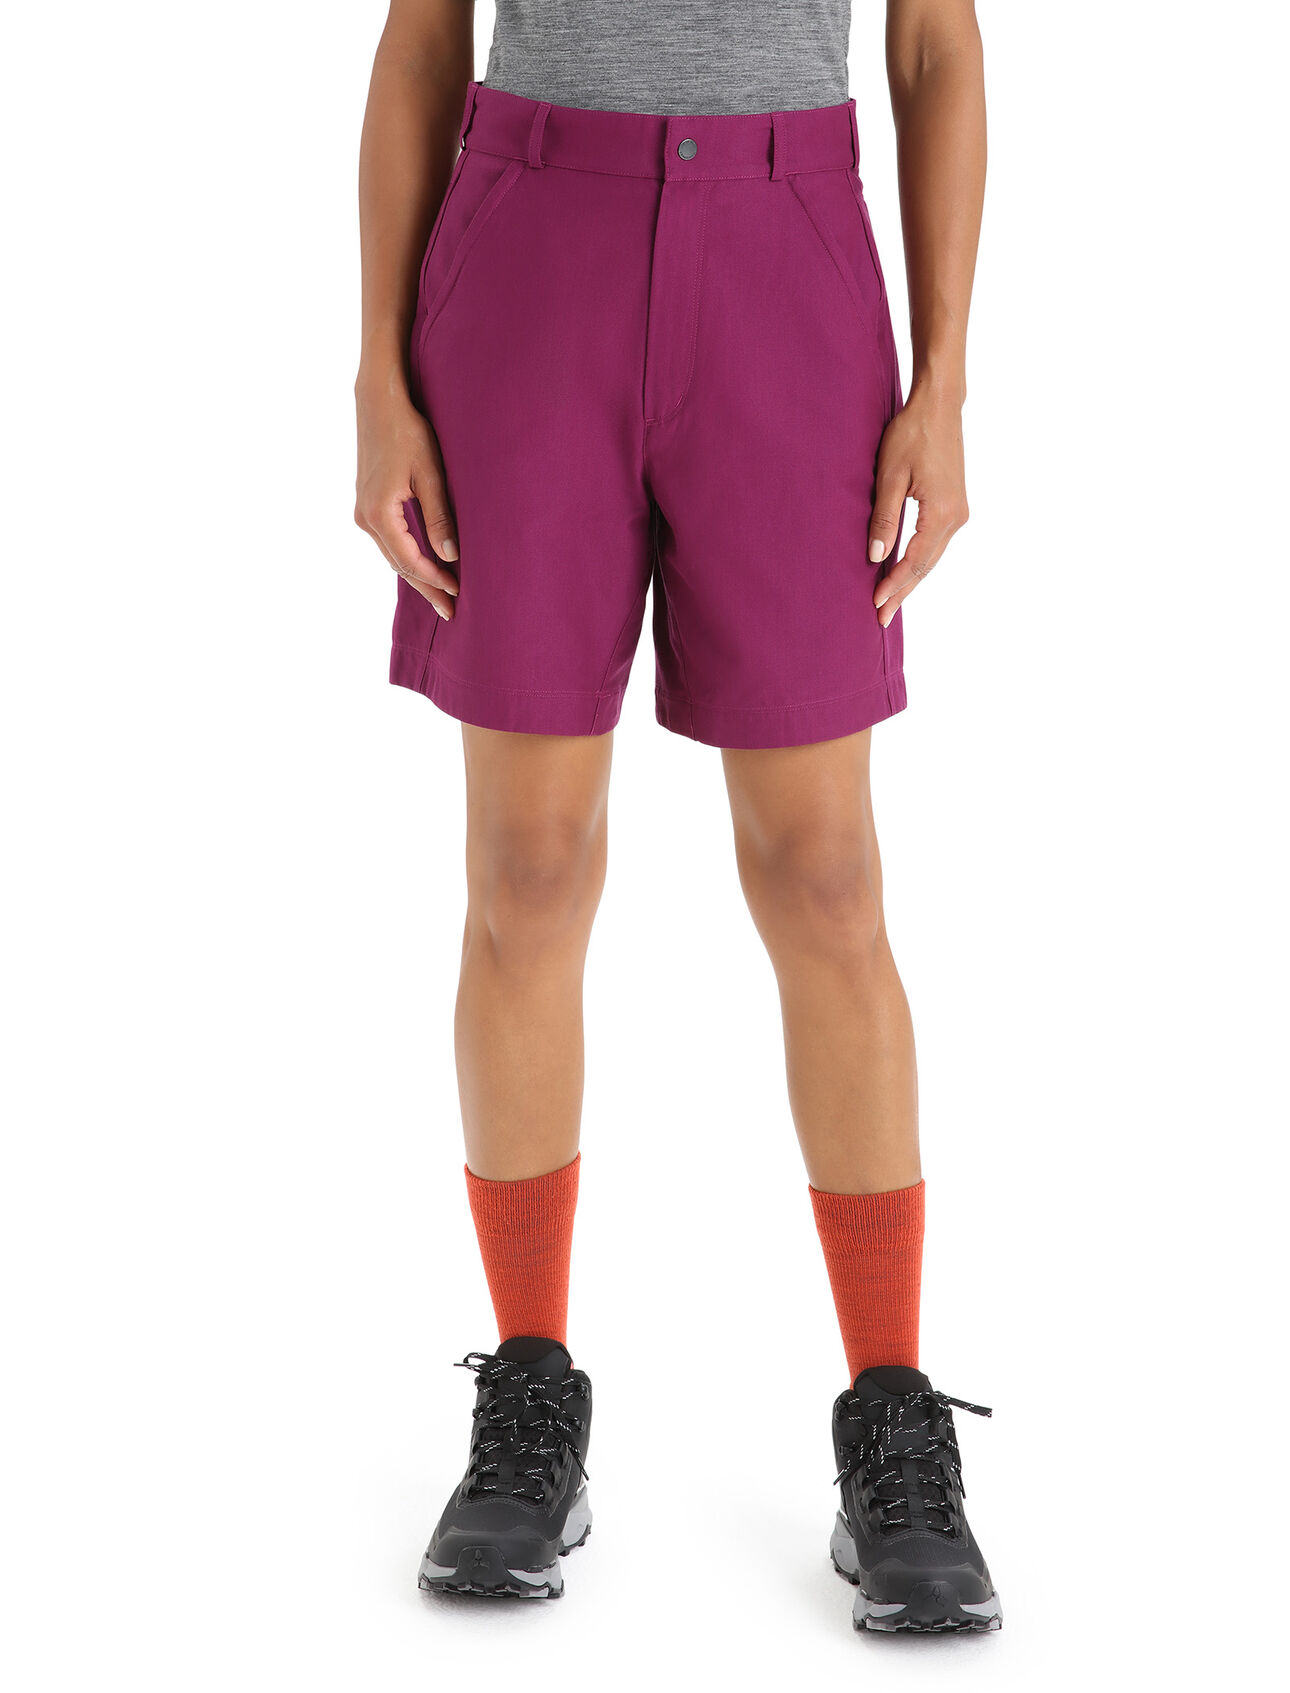 Womens Merino Hike Shorts A durable and dependable mountain short made from a unique blend of merino wool and organic cotton, the Hike Shorts are perfect for mountain adventures of all kinds.